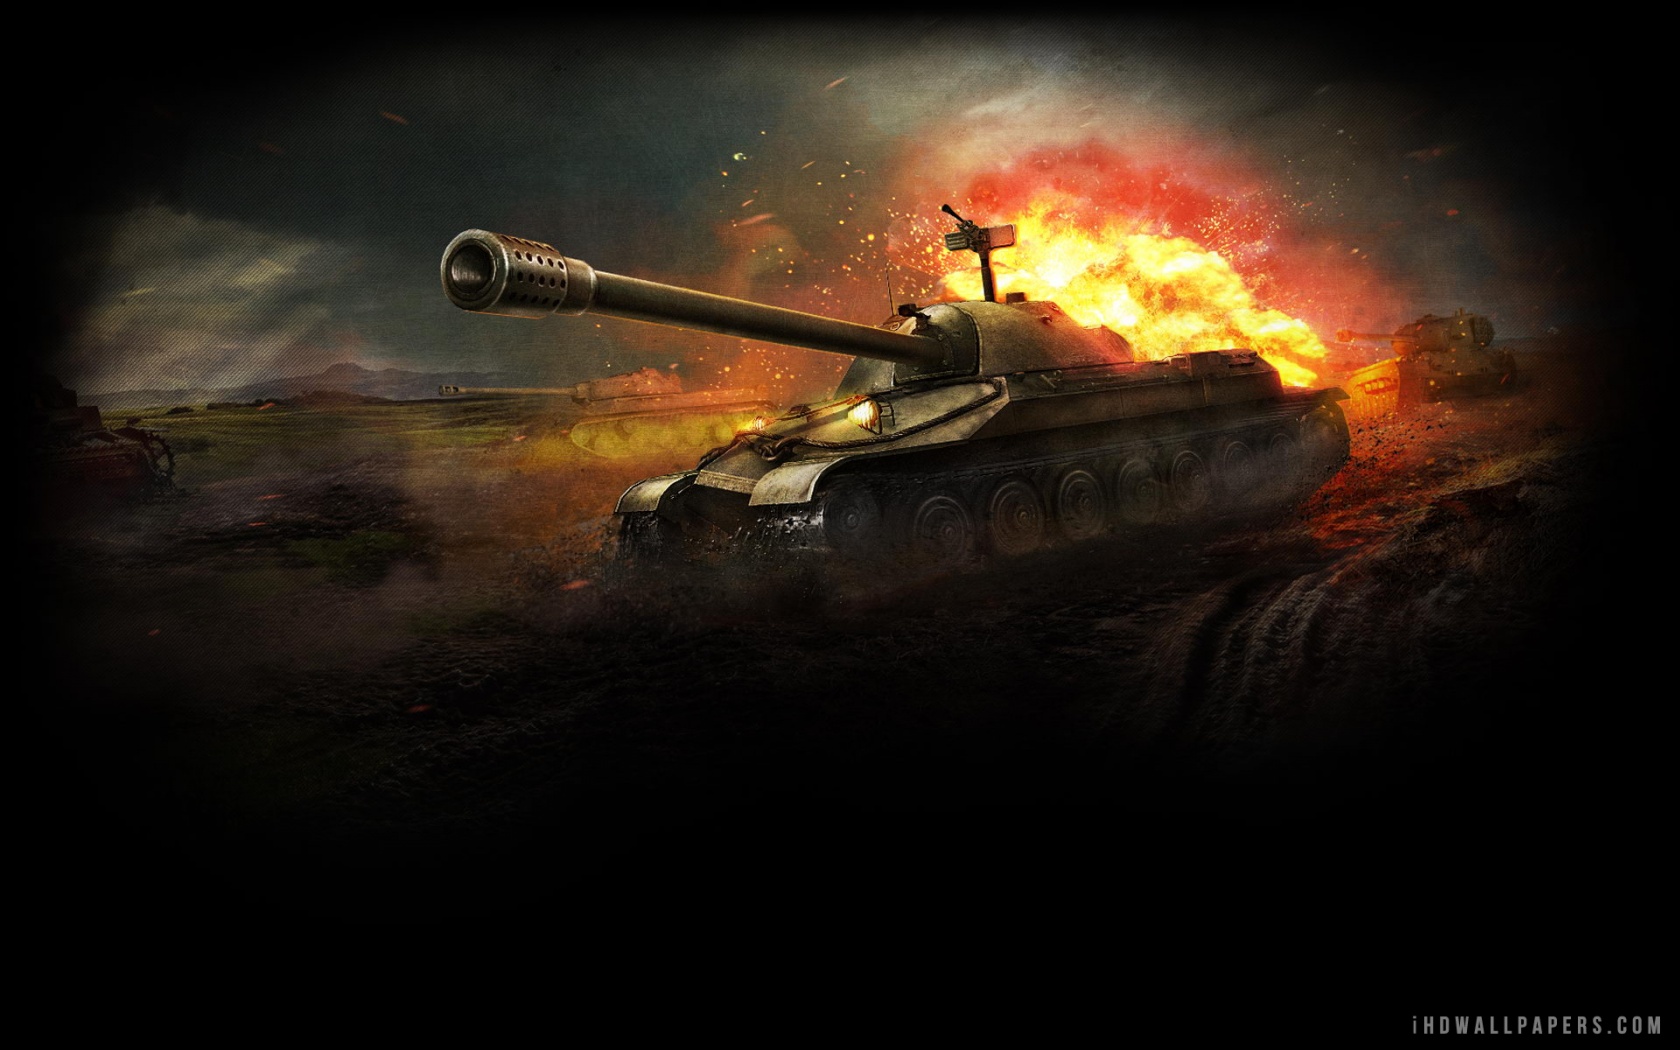  Download World Of Tanks 4 WallpaperBackground in 1680x1050